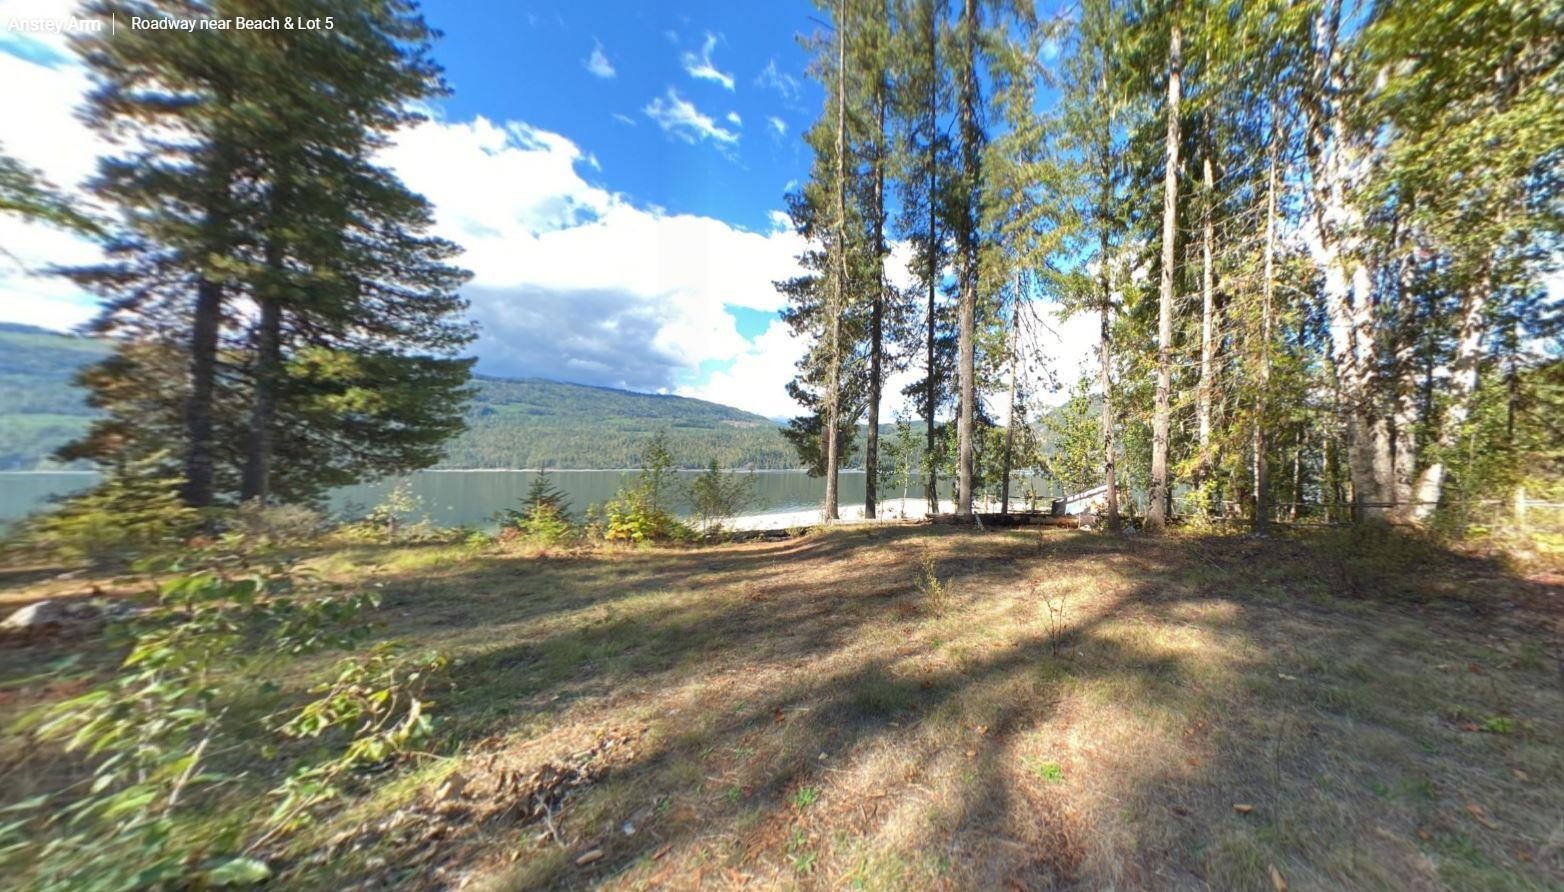 Listing image of LOT 6 N QUEEST ANSTEY ARM